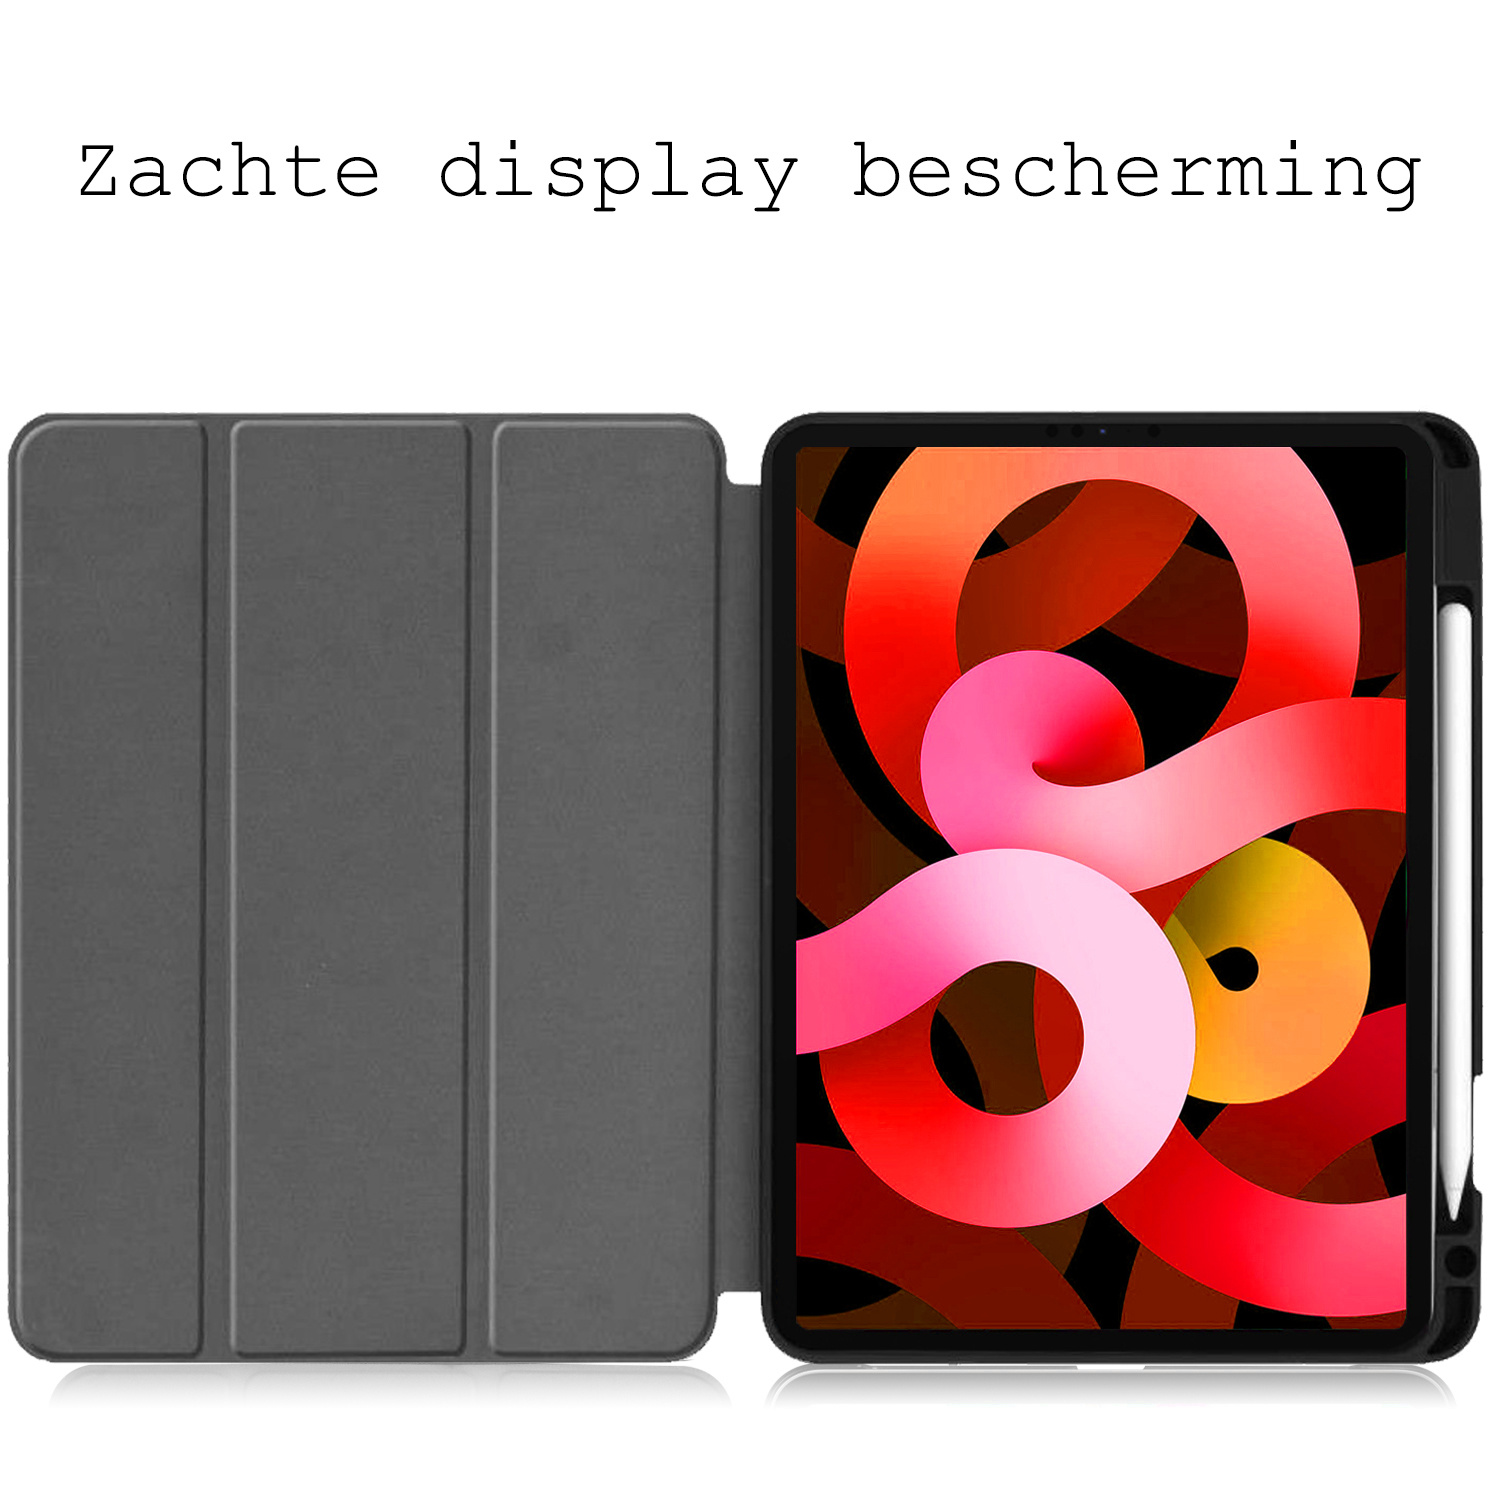 BASEY. iPad Air 5 2022 Hoes Case Hoesje Don't Touch Me Uitsparing Apple Pencil iPad Air 2022 10.9 Inch